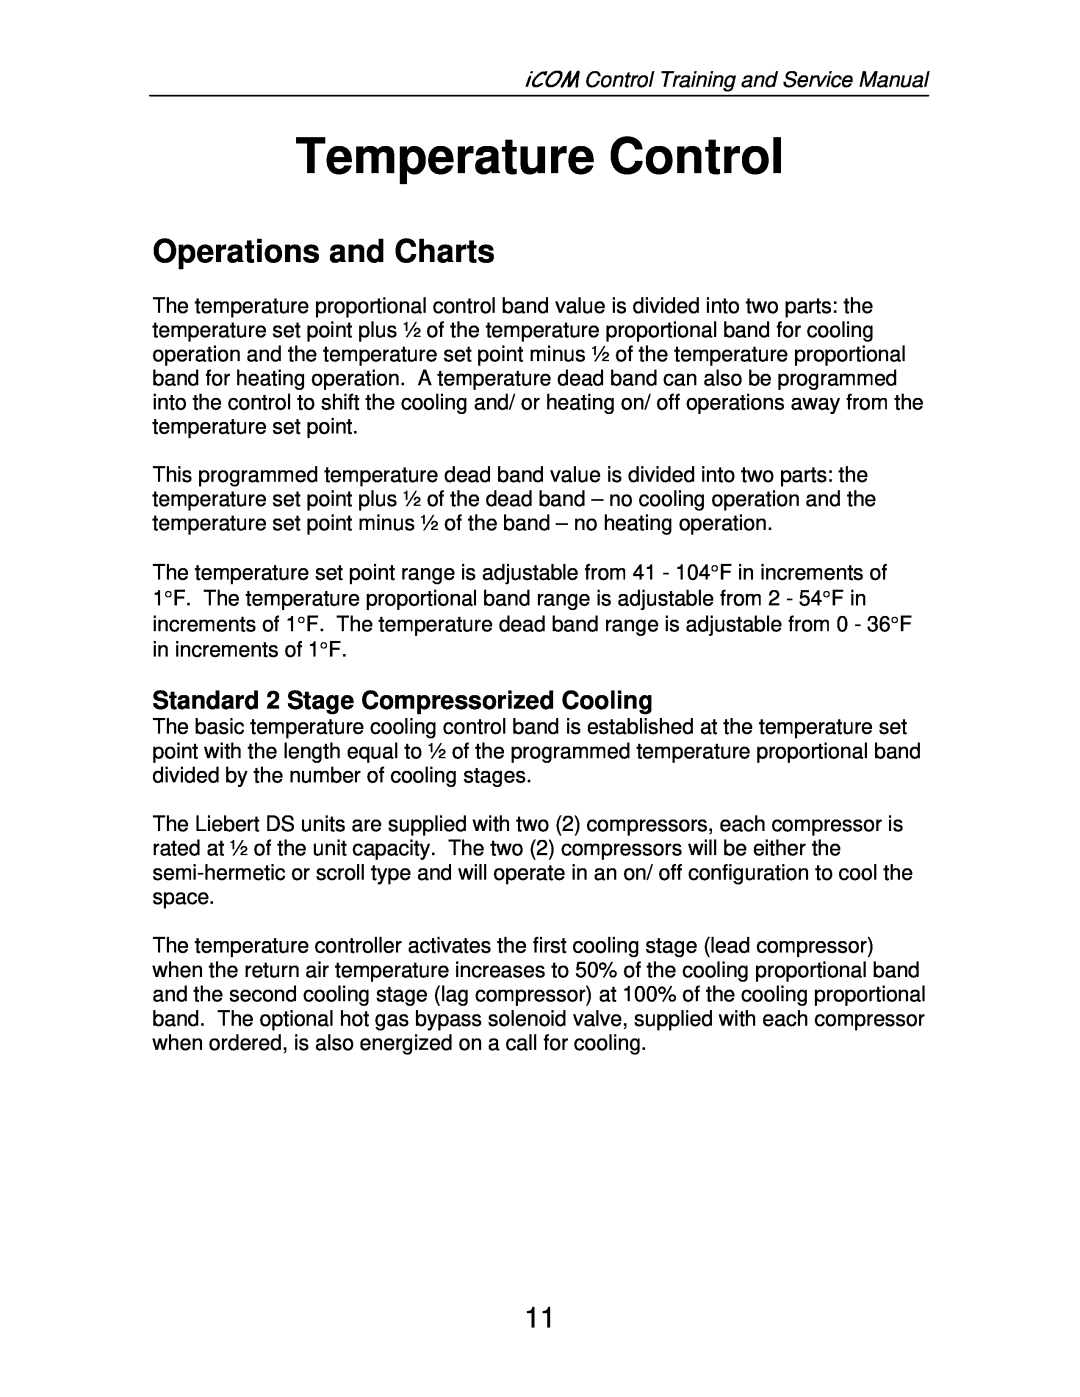 Liebert TM-10098 service manual Temperature Control, Operations and Charts, iCOM Control Training and Service Manual 